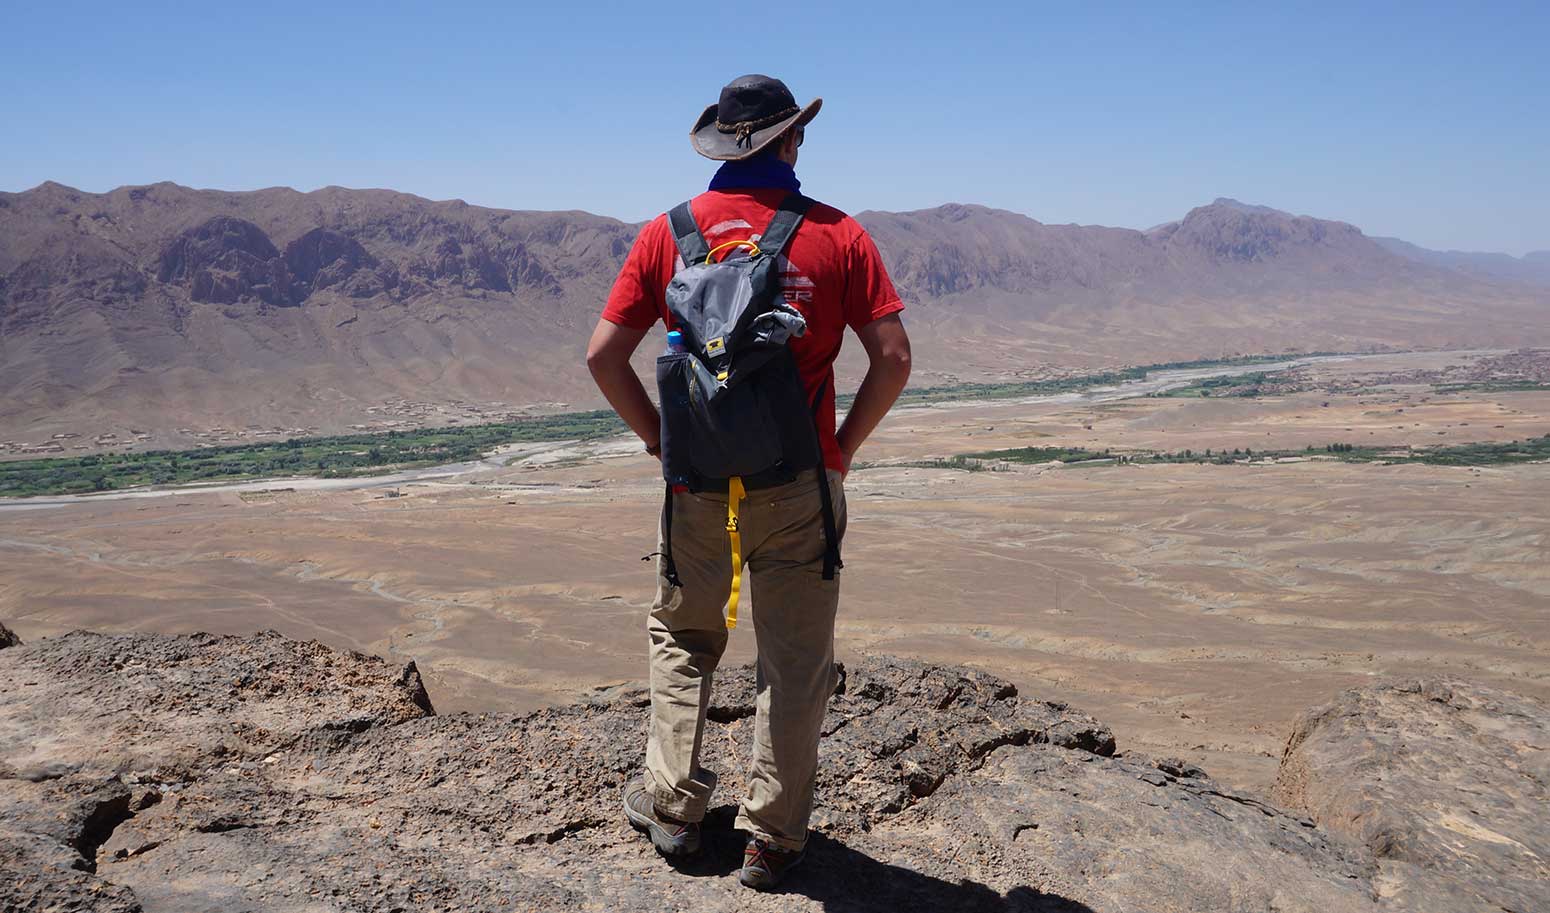 Henry "Ted" Kernan member of Team Spontaneous Khanbustion racing in the 2014 Mongol Rally, and Mountainsmith Brand Ambassador is pictured wearing the Mountainsmith Scream backpack over looking a river gorge.